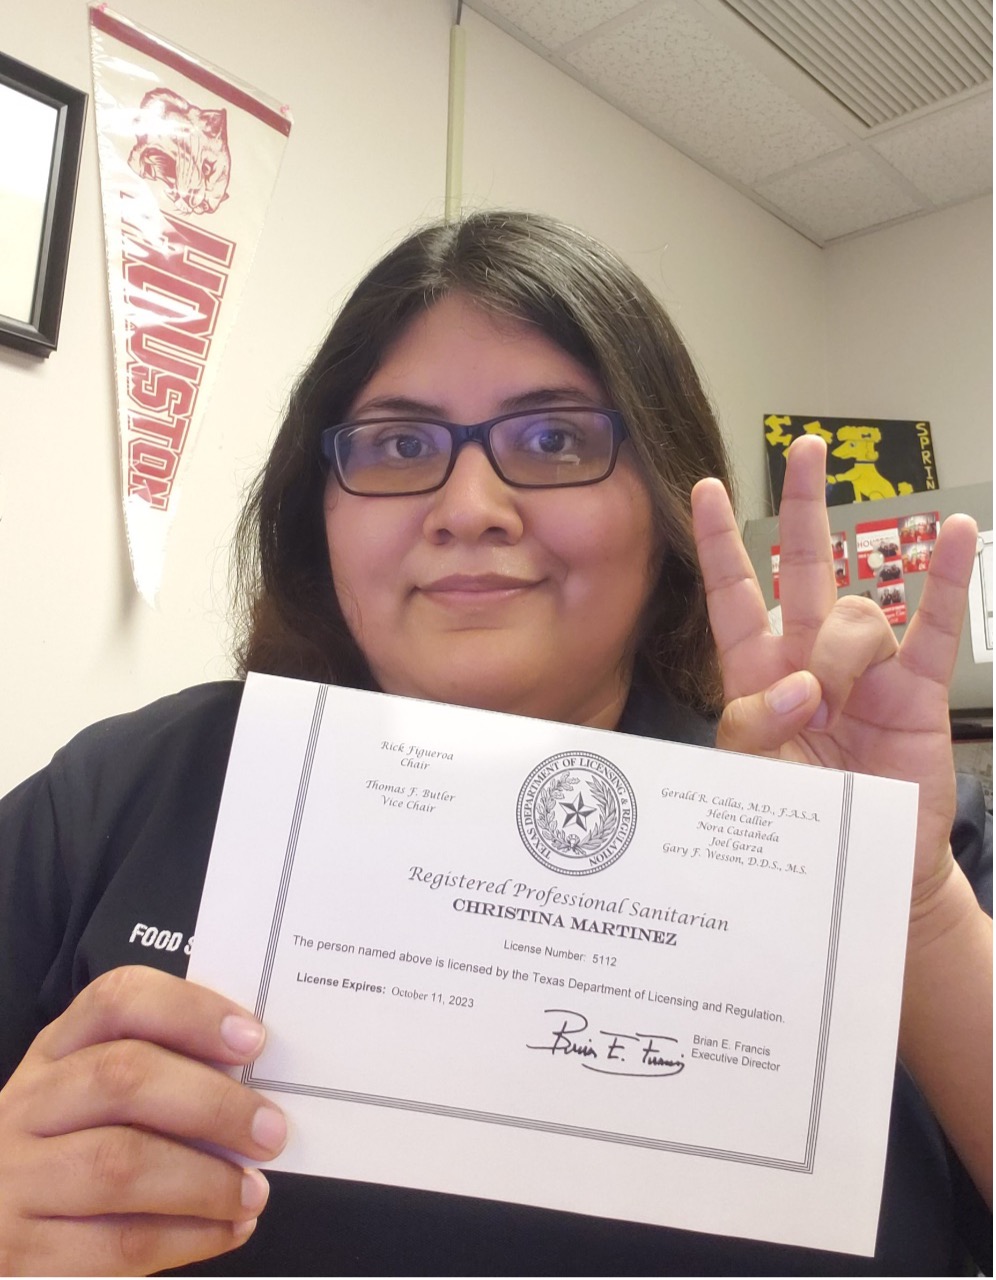 On October 11, 2021, Christina Martinez, UH Health Inspector, passed her registered sanitarian examination for Texas. Registered sanitarians are public health professionals qualified by specific education, specialized training, and field experience to protect the public's health, safety, and general welfare from adverse environmental determinants.